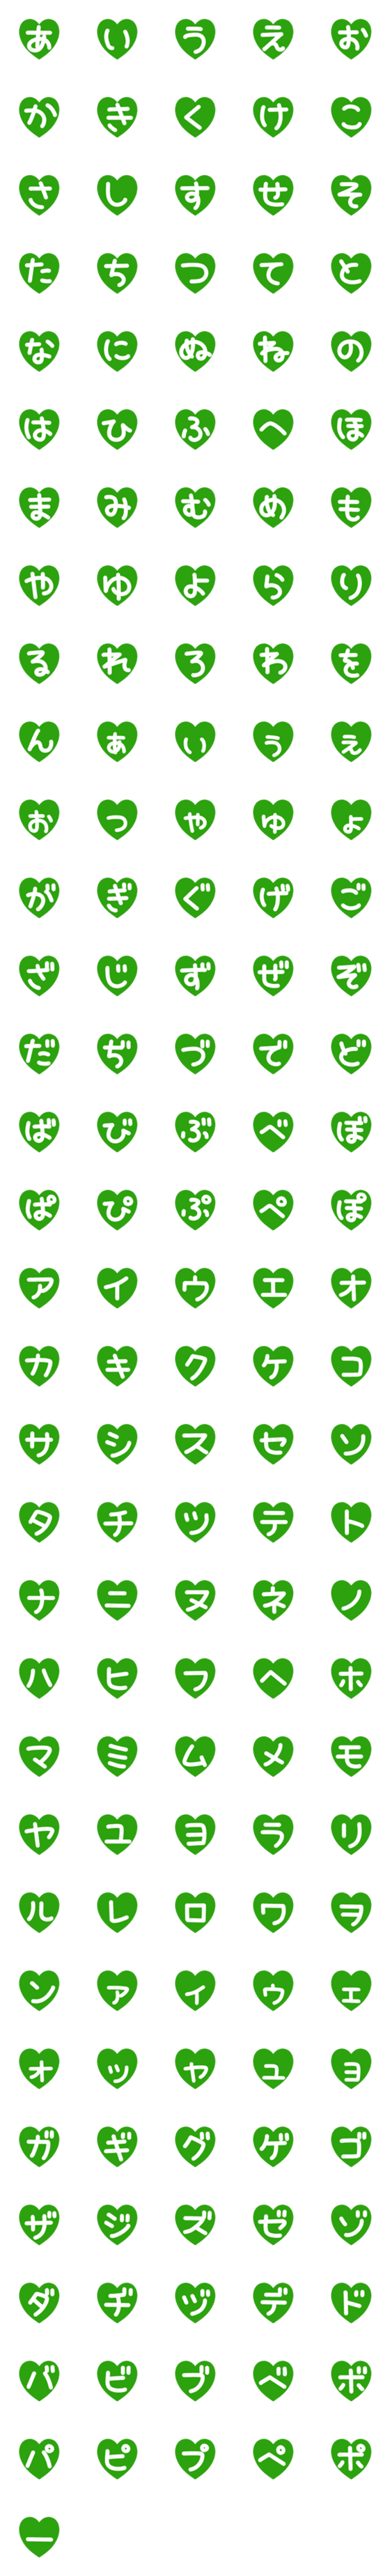 [LINE絵文字]はーと手書きフォント緑の画像一覧